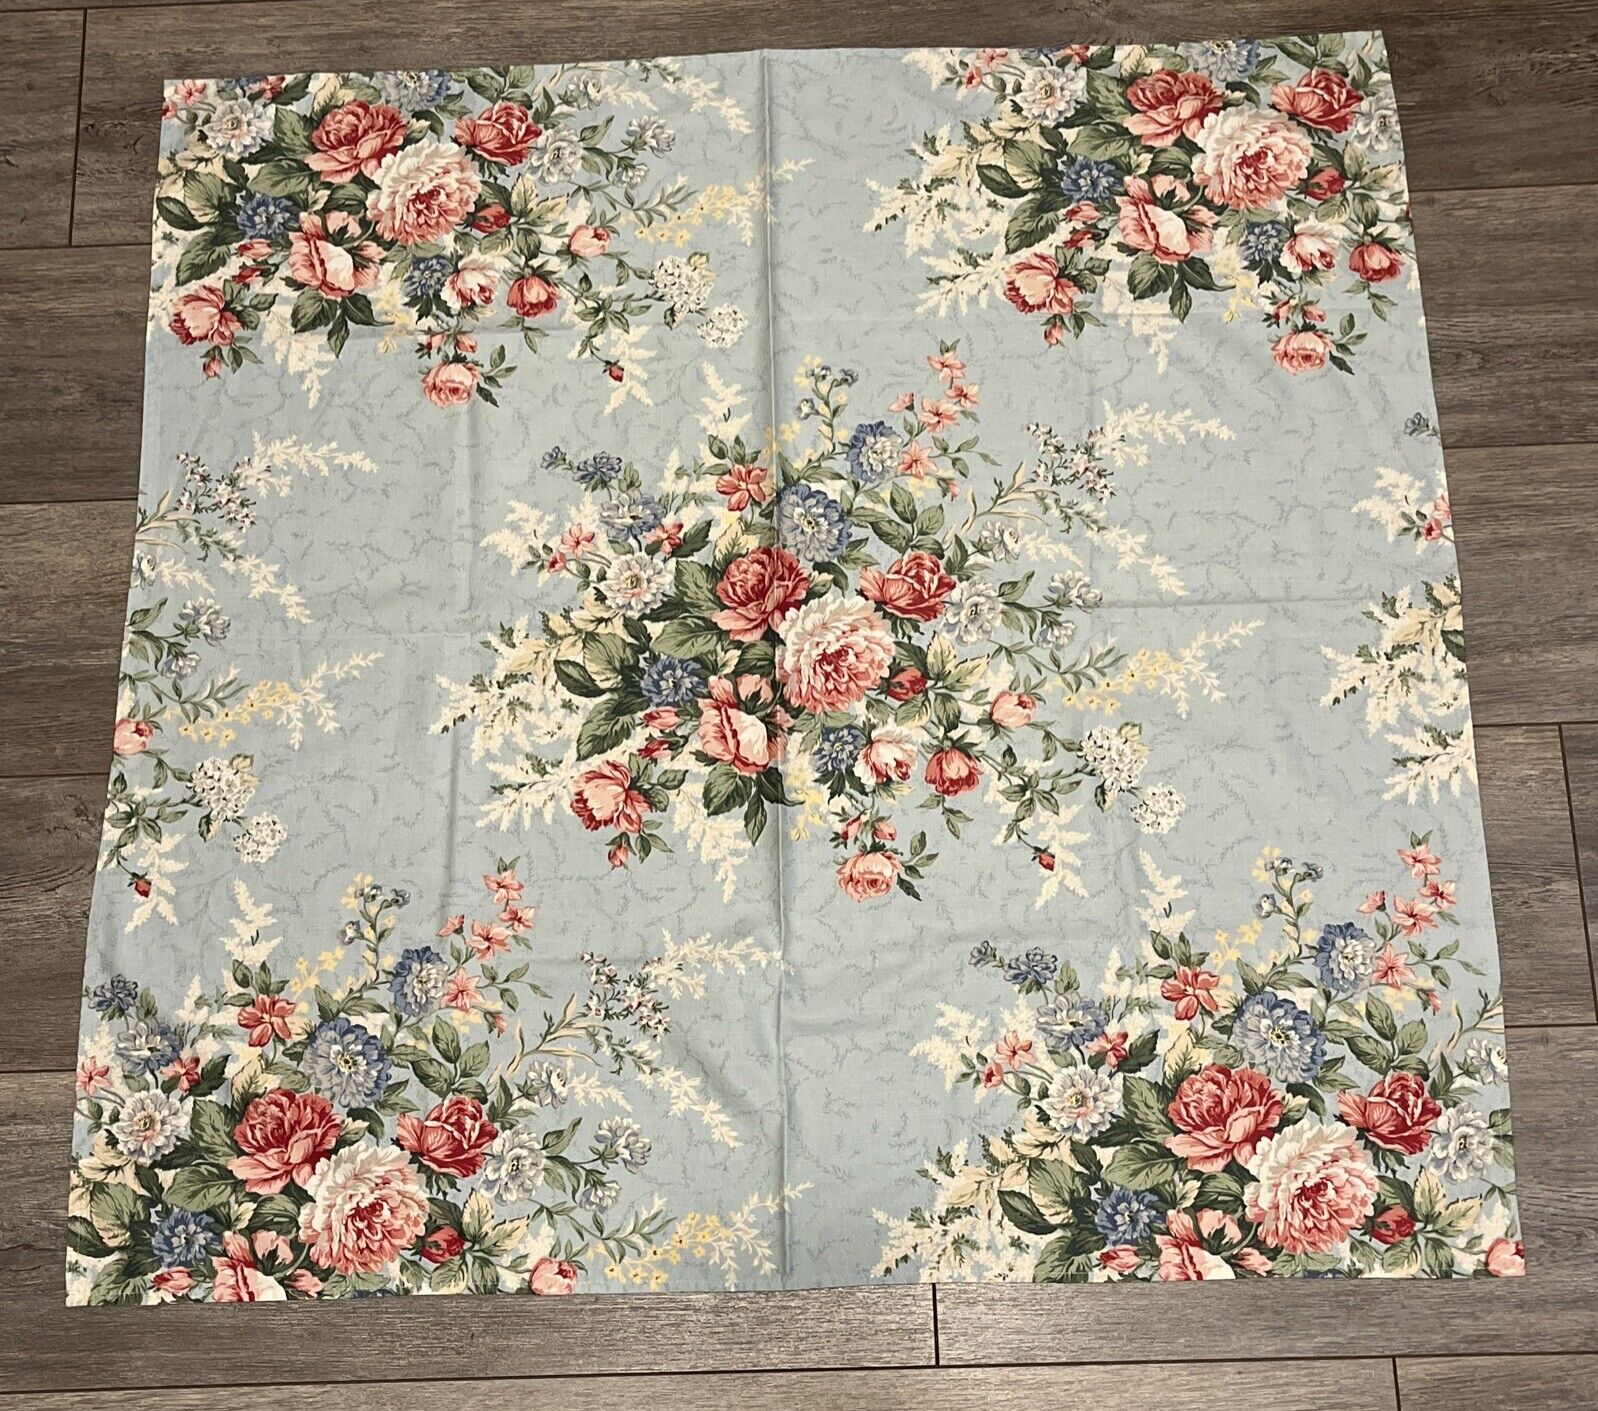 Small VTG All-cotton Tablecloth, Topper Floral In Shades Of Blue Pink 33 x 34